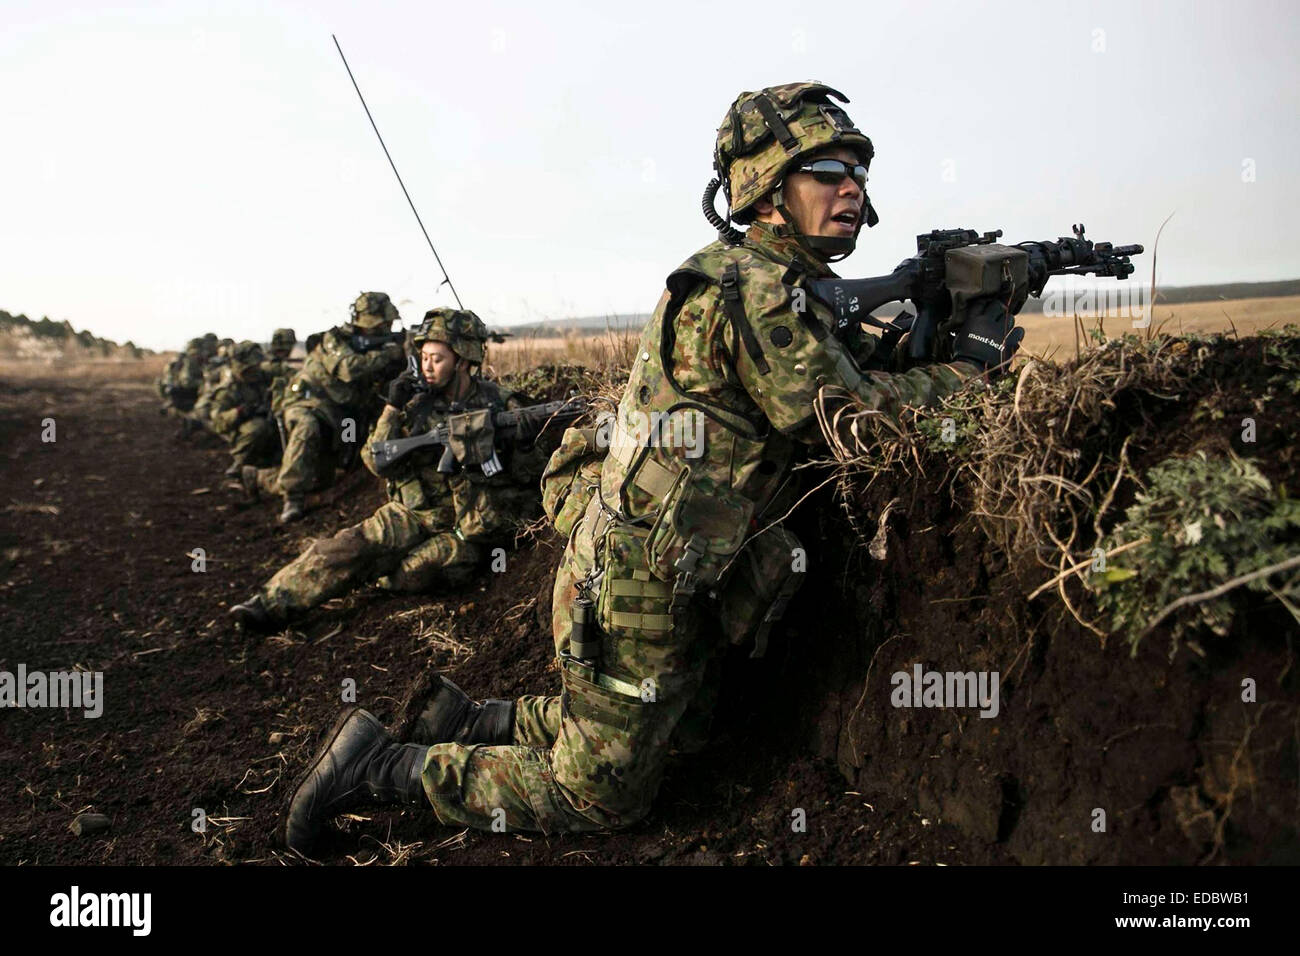 Japan Ground Self-Defense Force soldiers during a simulated firefight part of Forest Light joint training exercise at the Oyanohara Training Area December 9, 2014 in Yamato, Kumamoto prefecture, Japan. Stock Photo